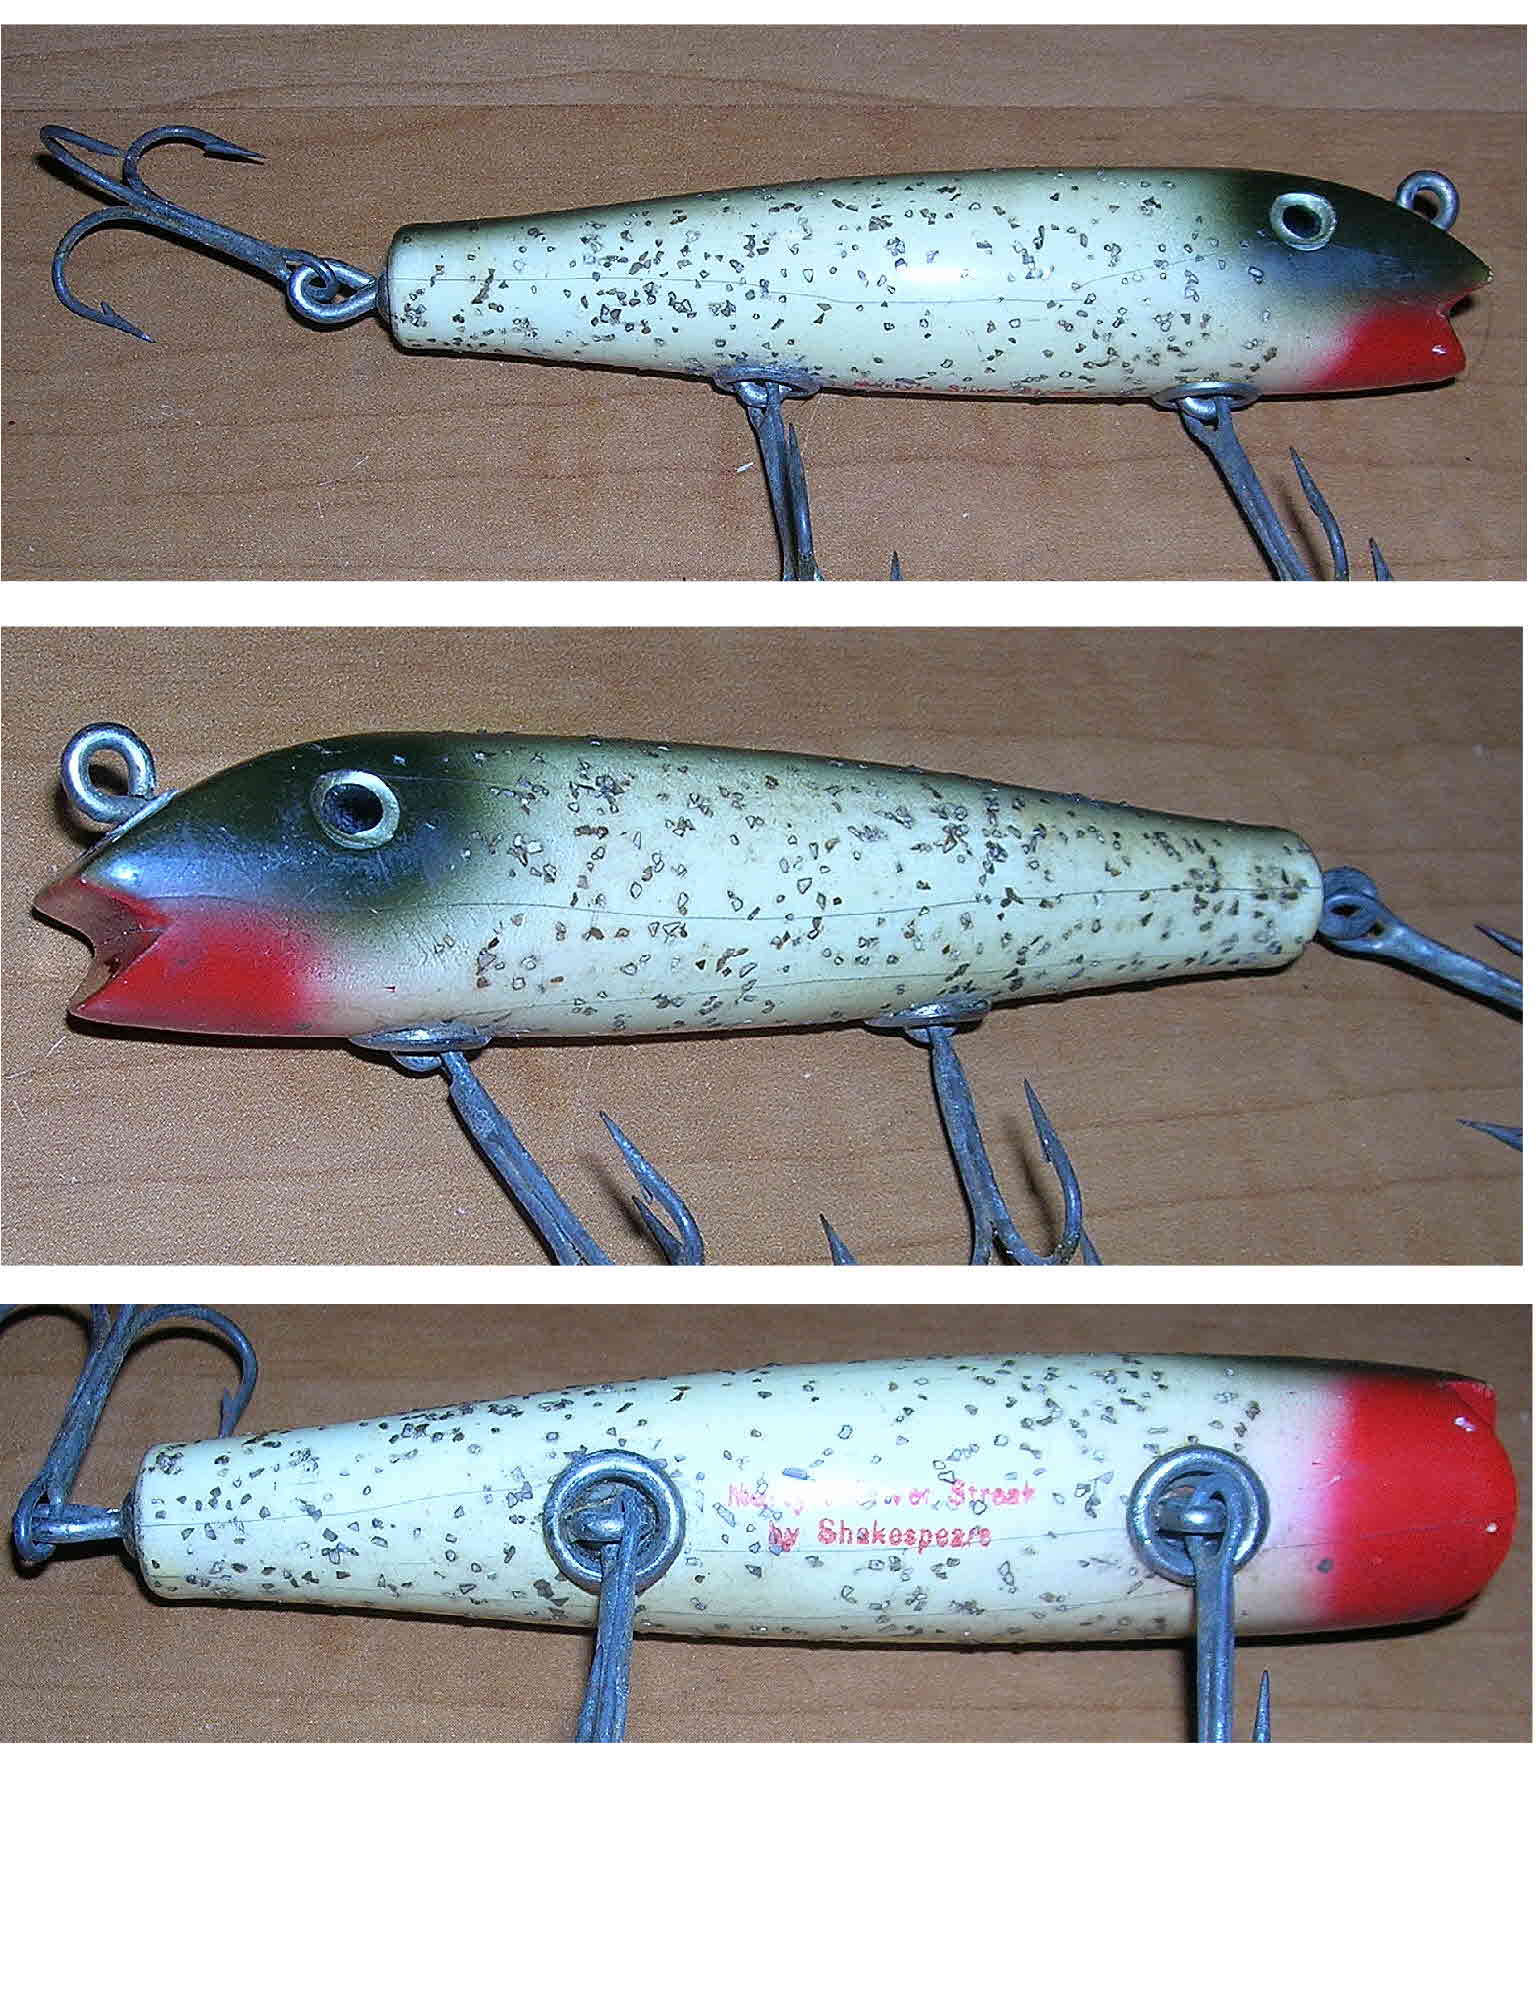 Vintage Fishing Lure Shakespeare Mouse Lure Glass Eyes